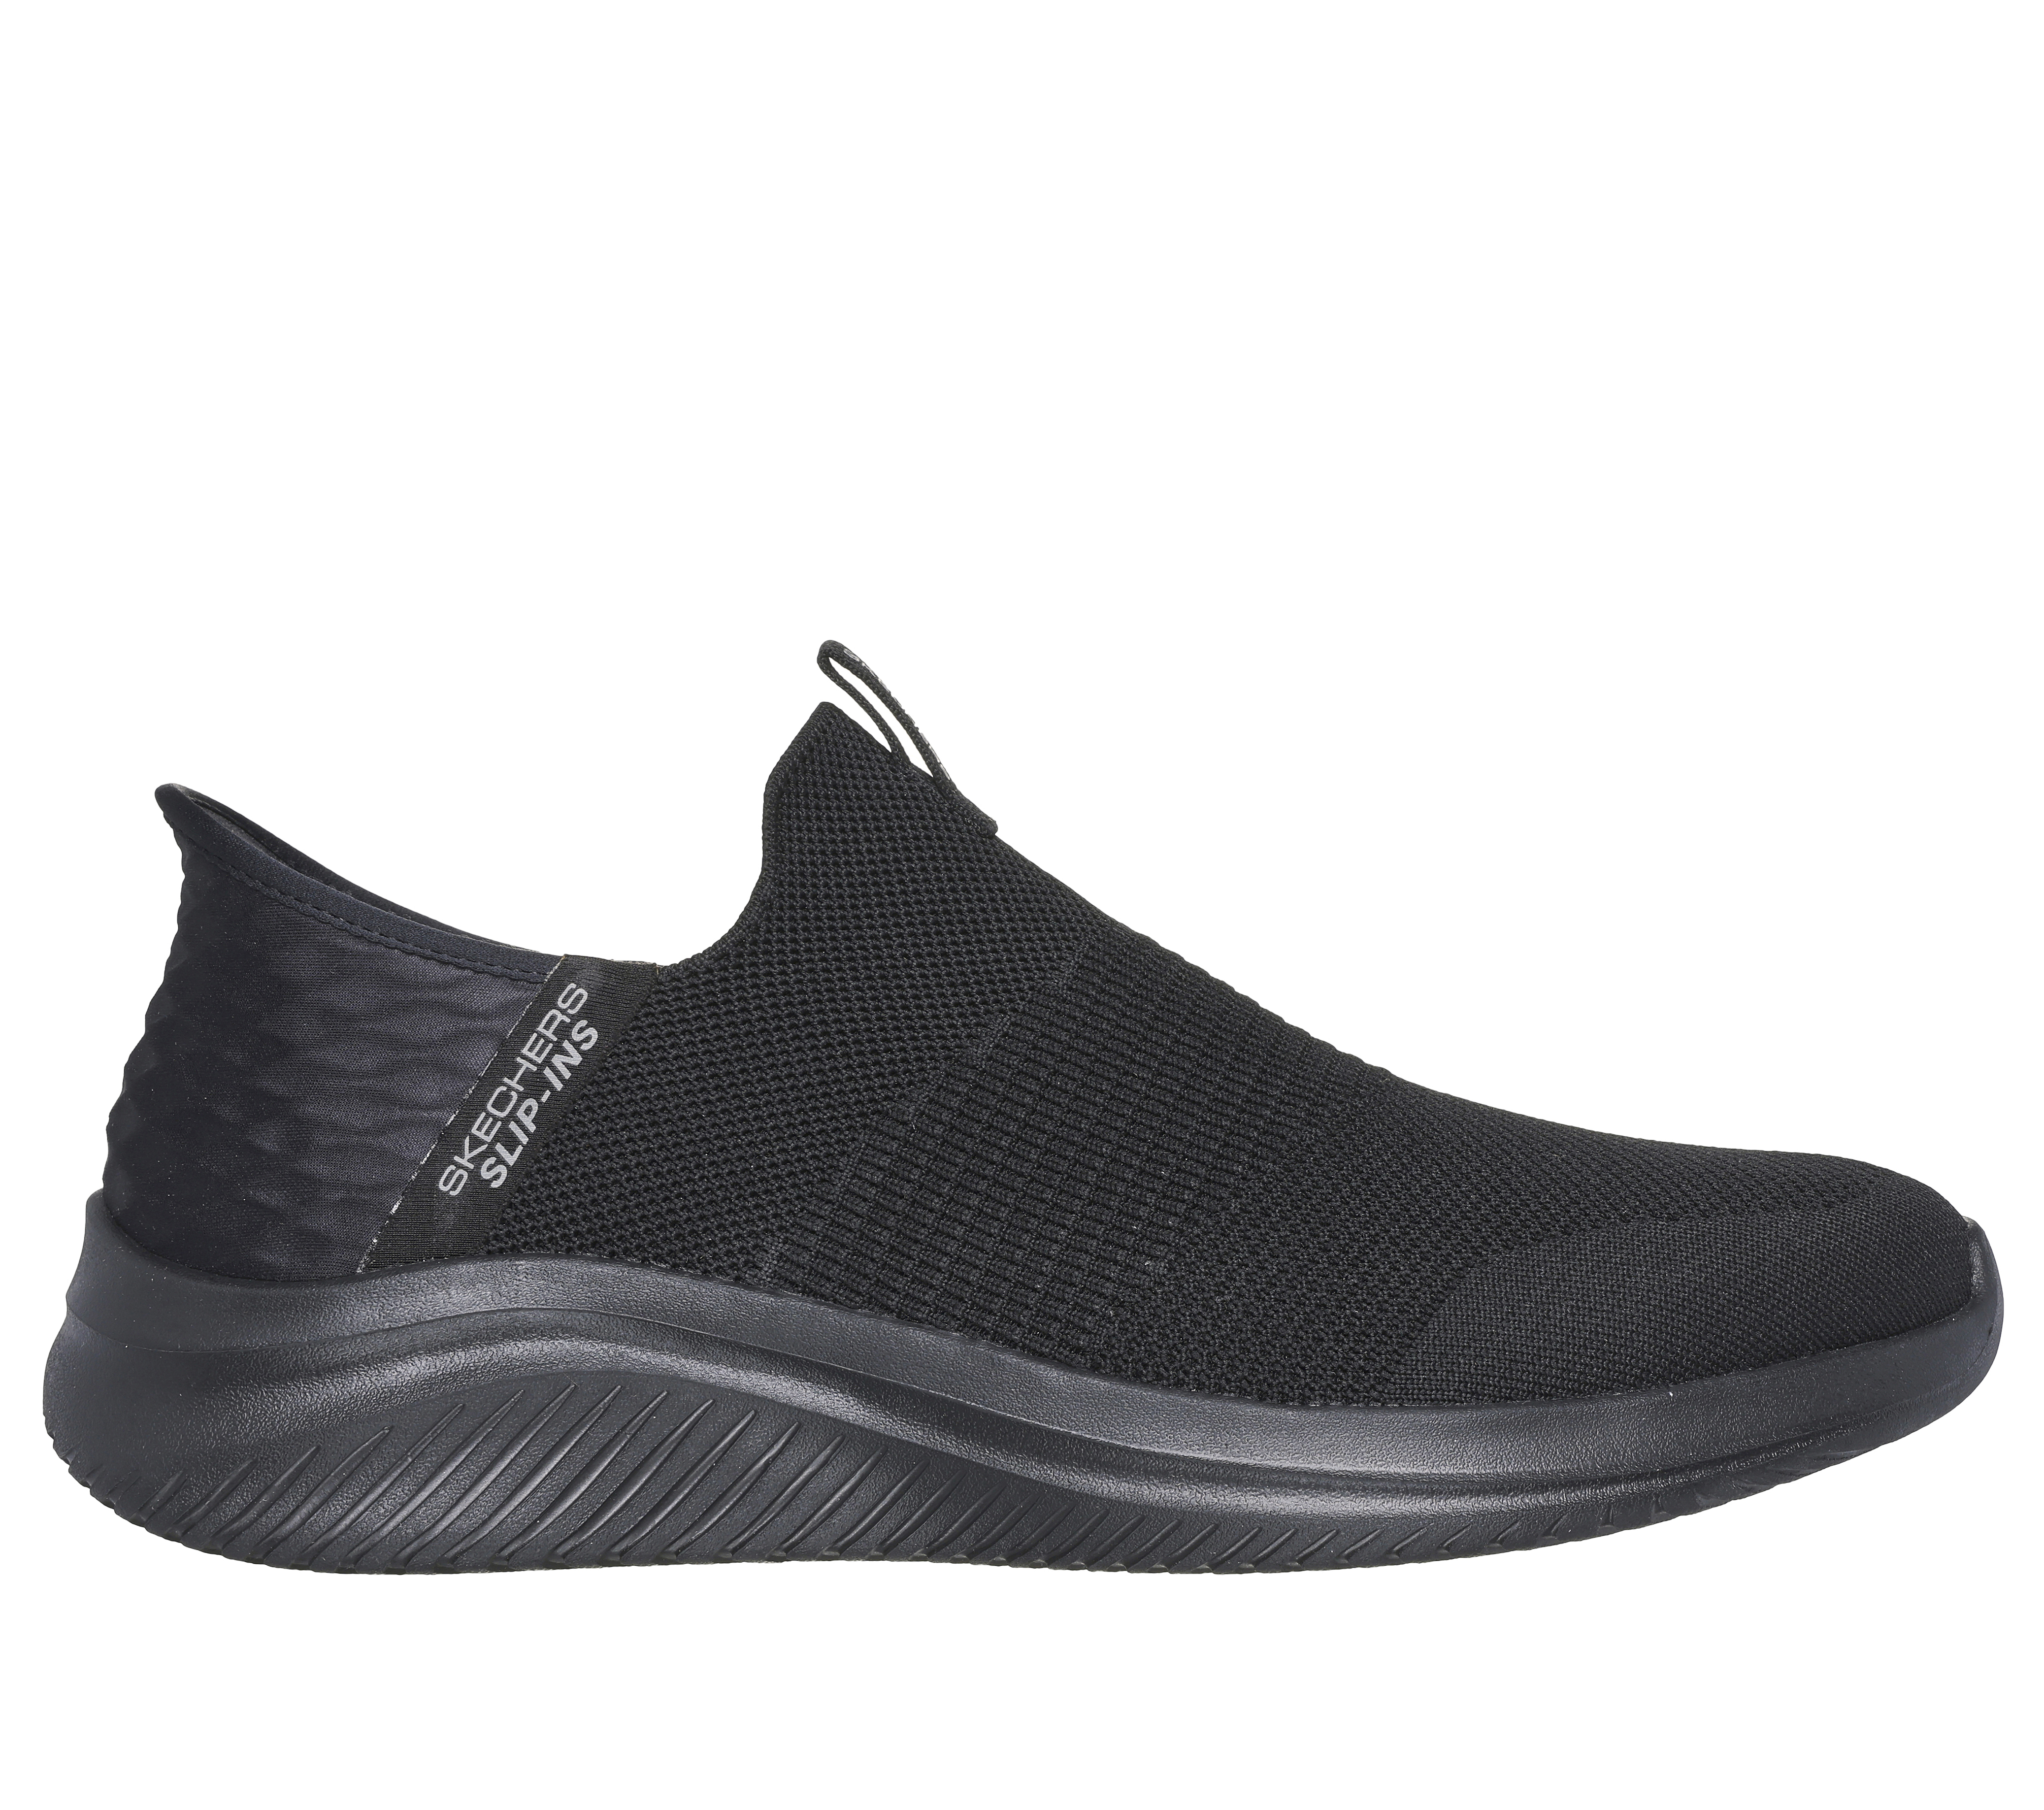 How Much Are Skechers Slip Ons?